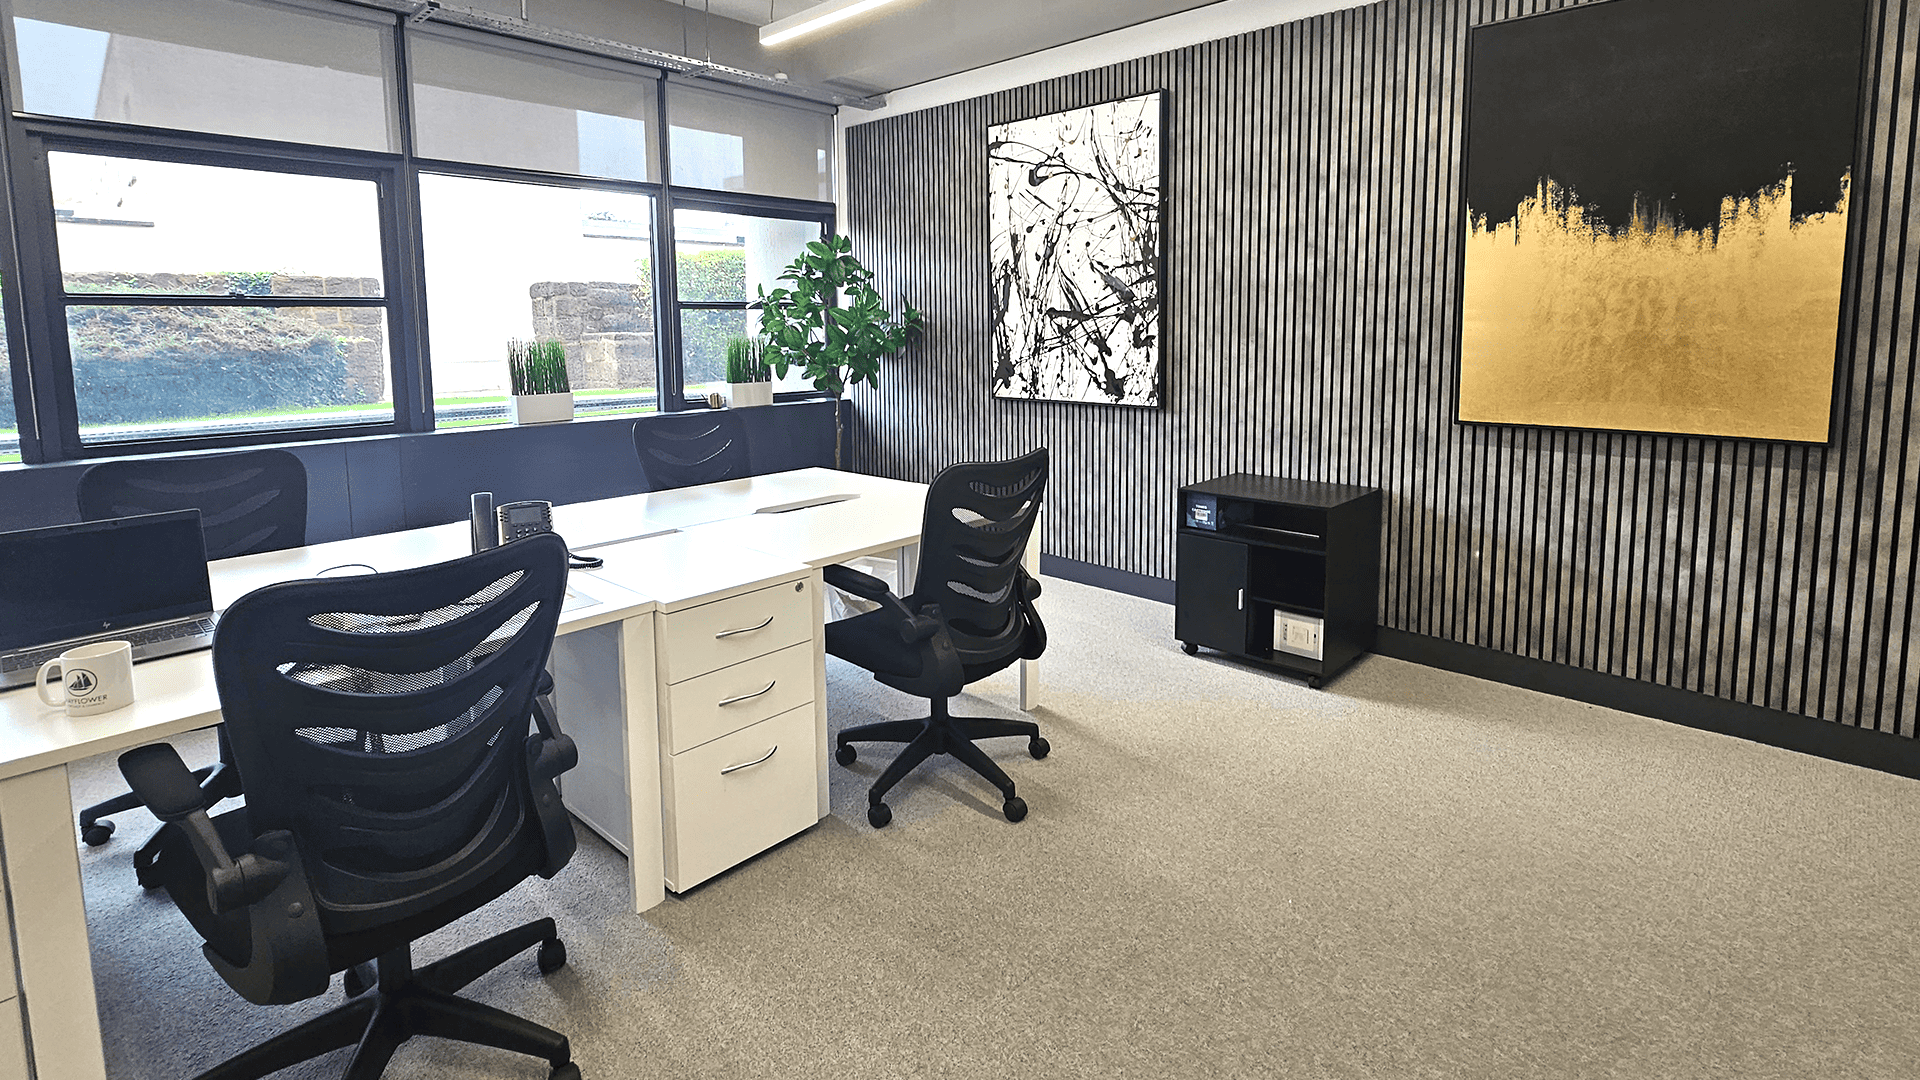 Light and airy office at Winslade Park with large windows, white desks, black ergonomic chairs, stylish grey panel walls with contemporary artwork and a tall potted plant in the corner